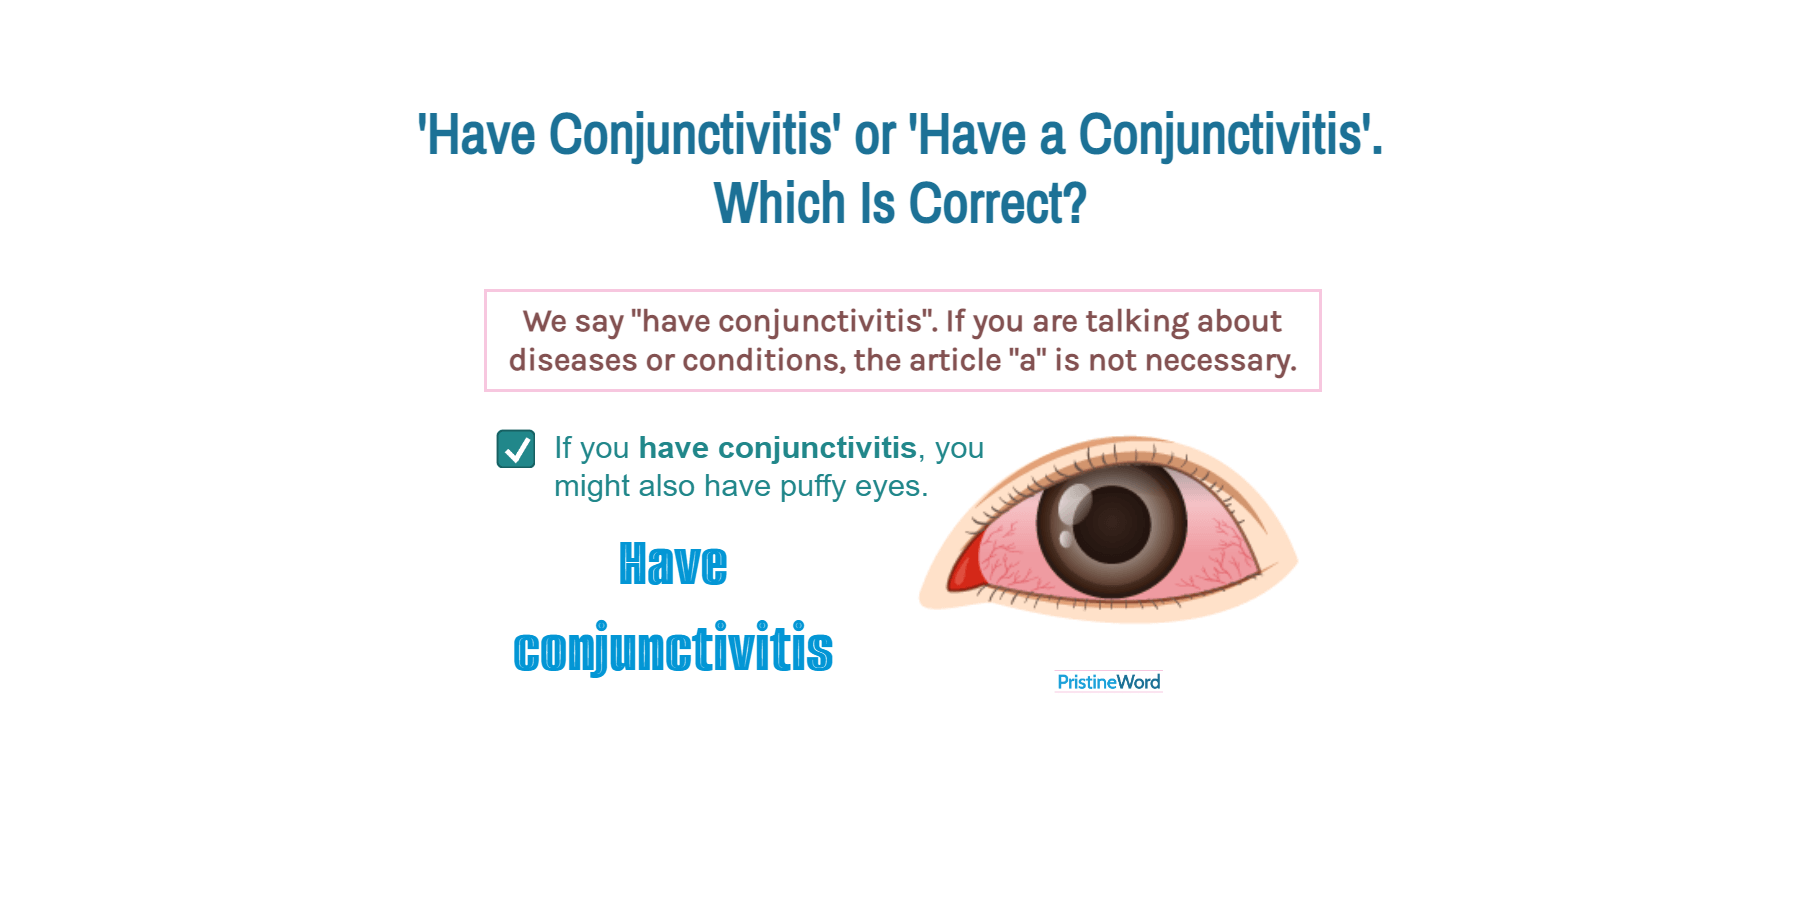 Have Conjunctivitis or Have a Conjunctivitis. Which Is Correct?